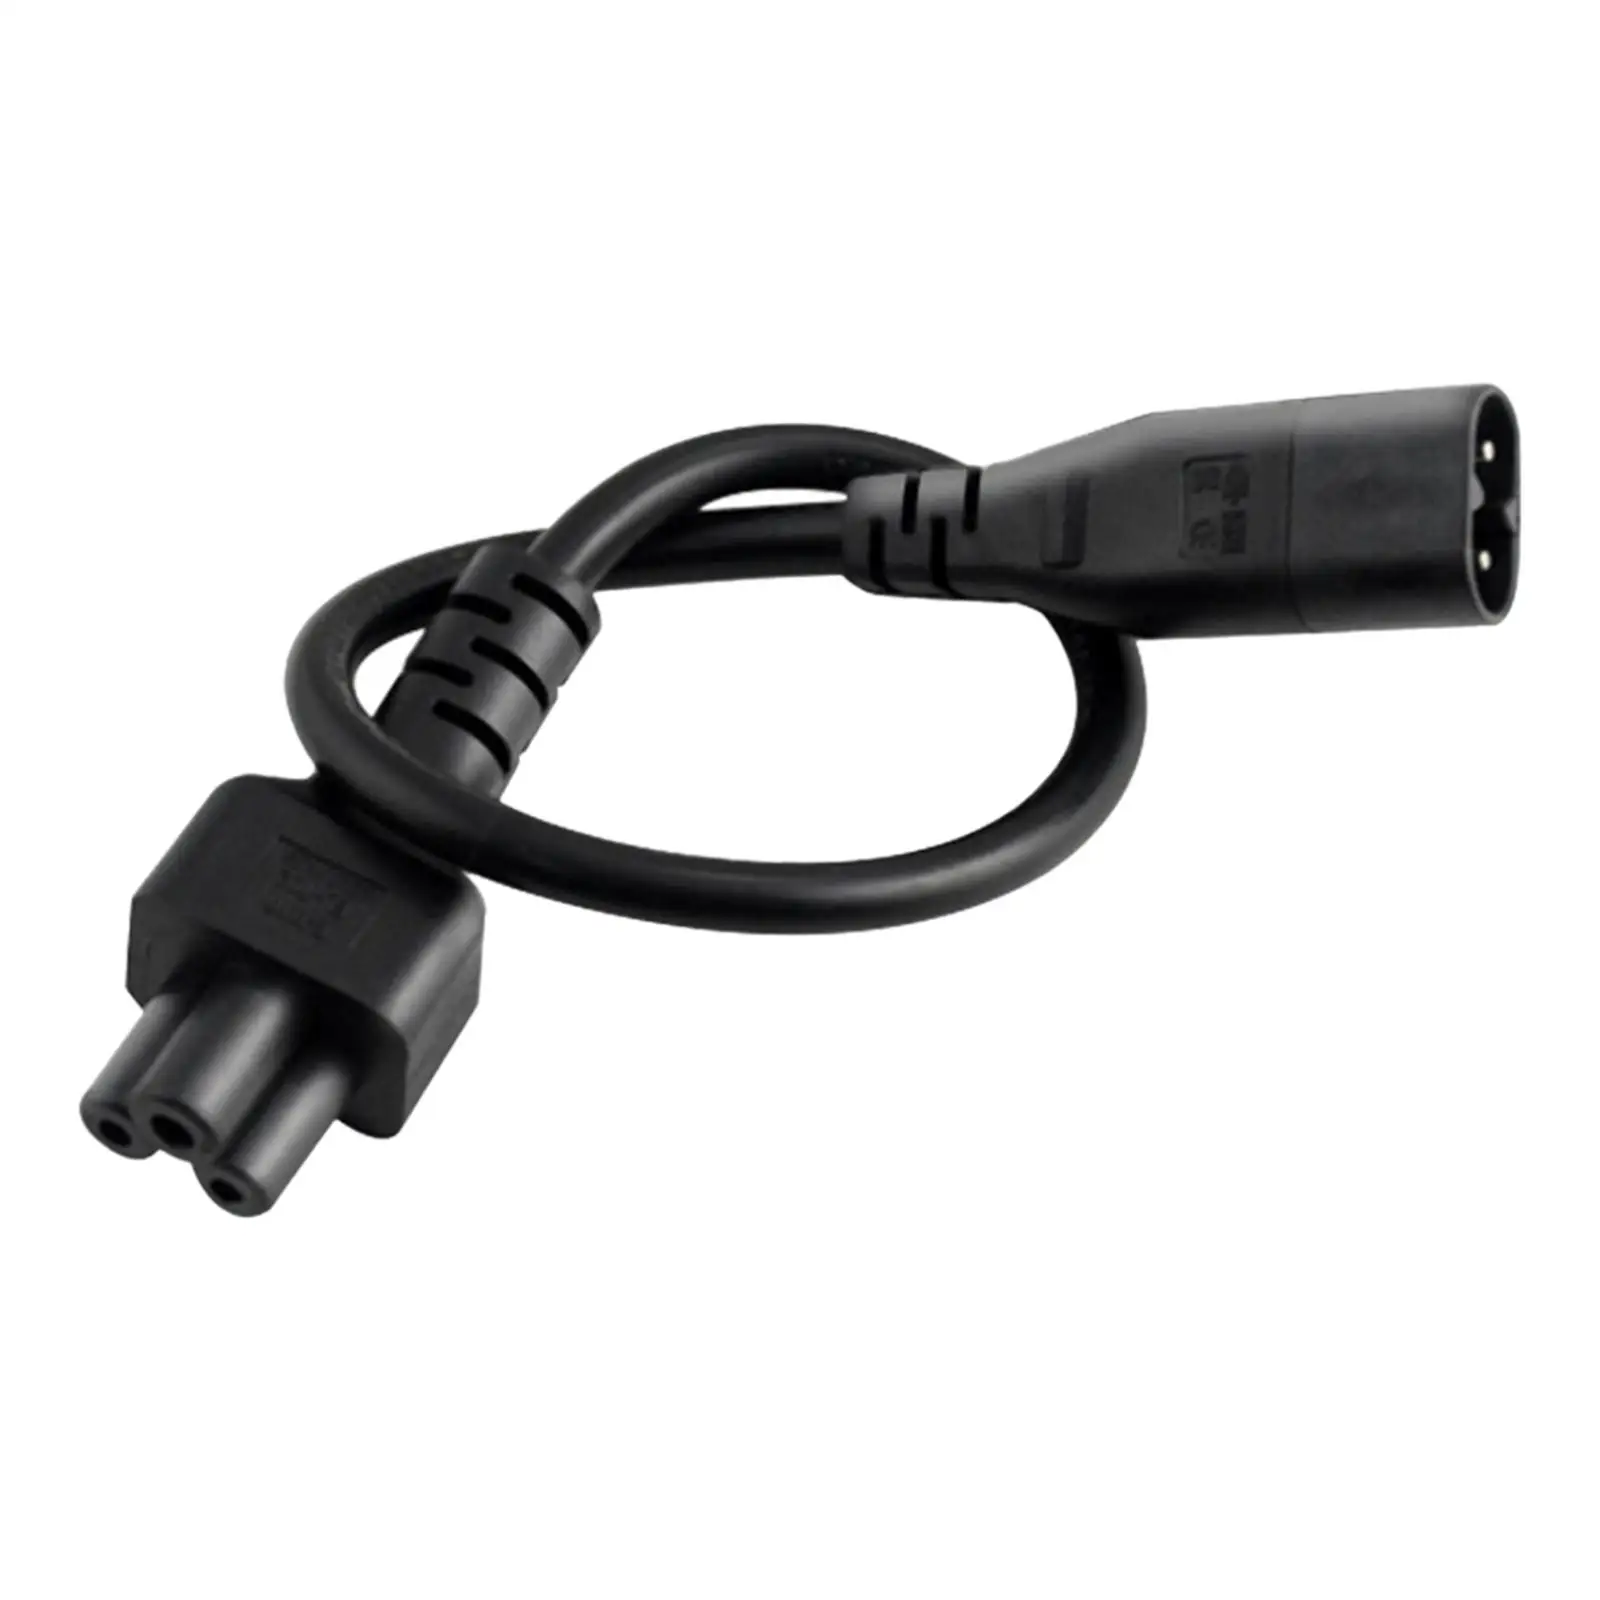 30cm IEC320-C8 to IEC320-C5 Power Adapter Cable Waterproof 250V Flexible Universal Short Extension Cord for Computer Monitor